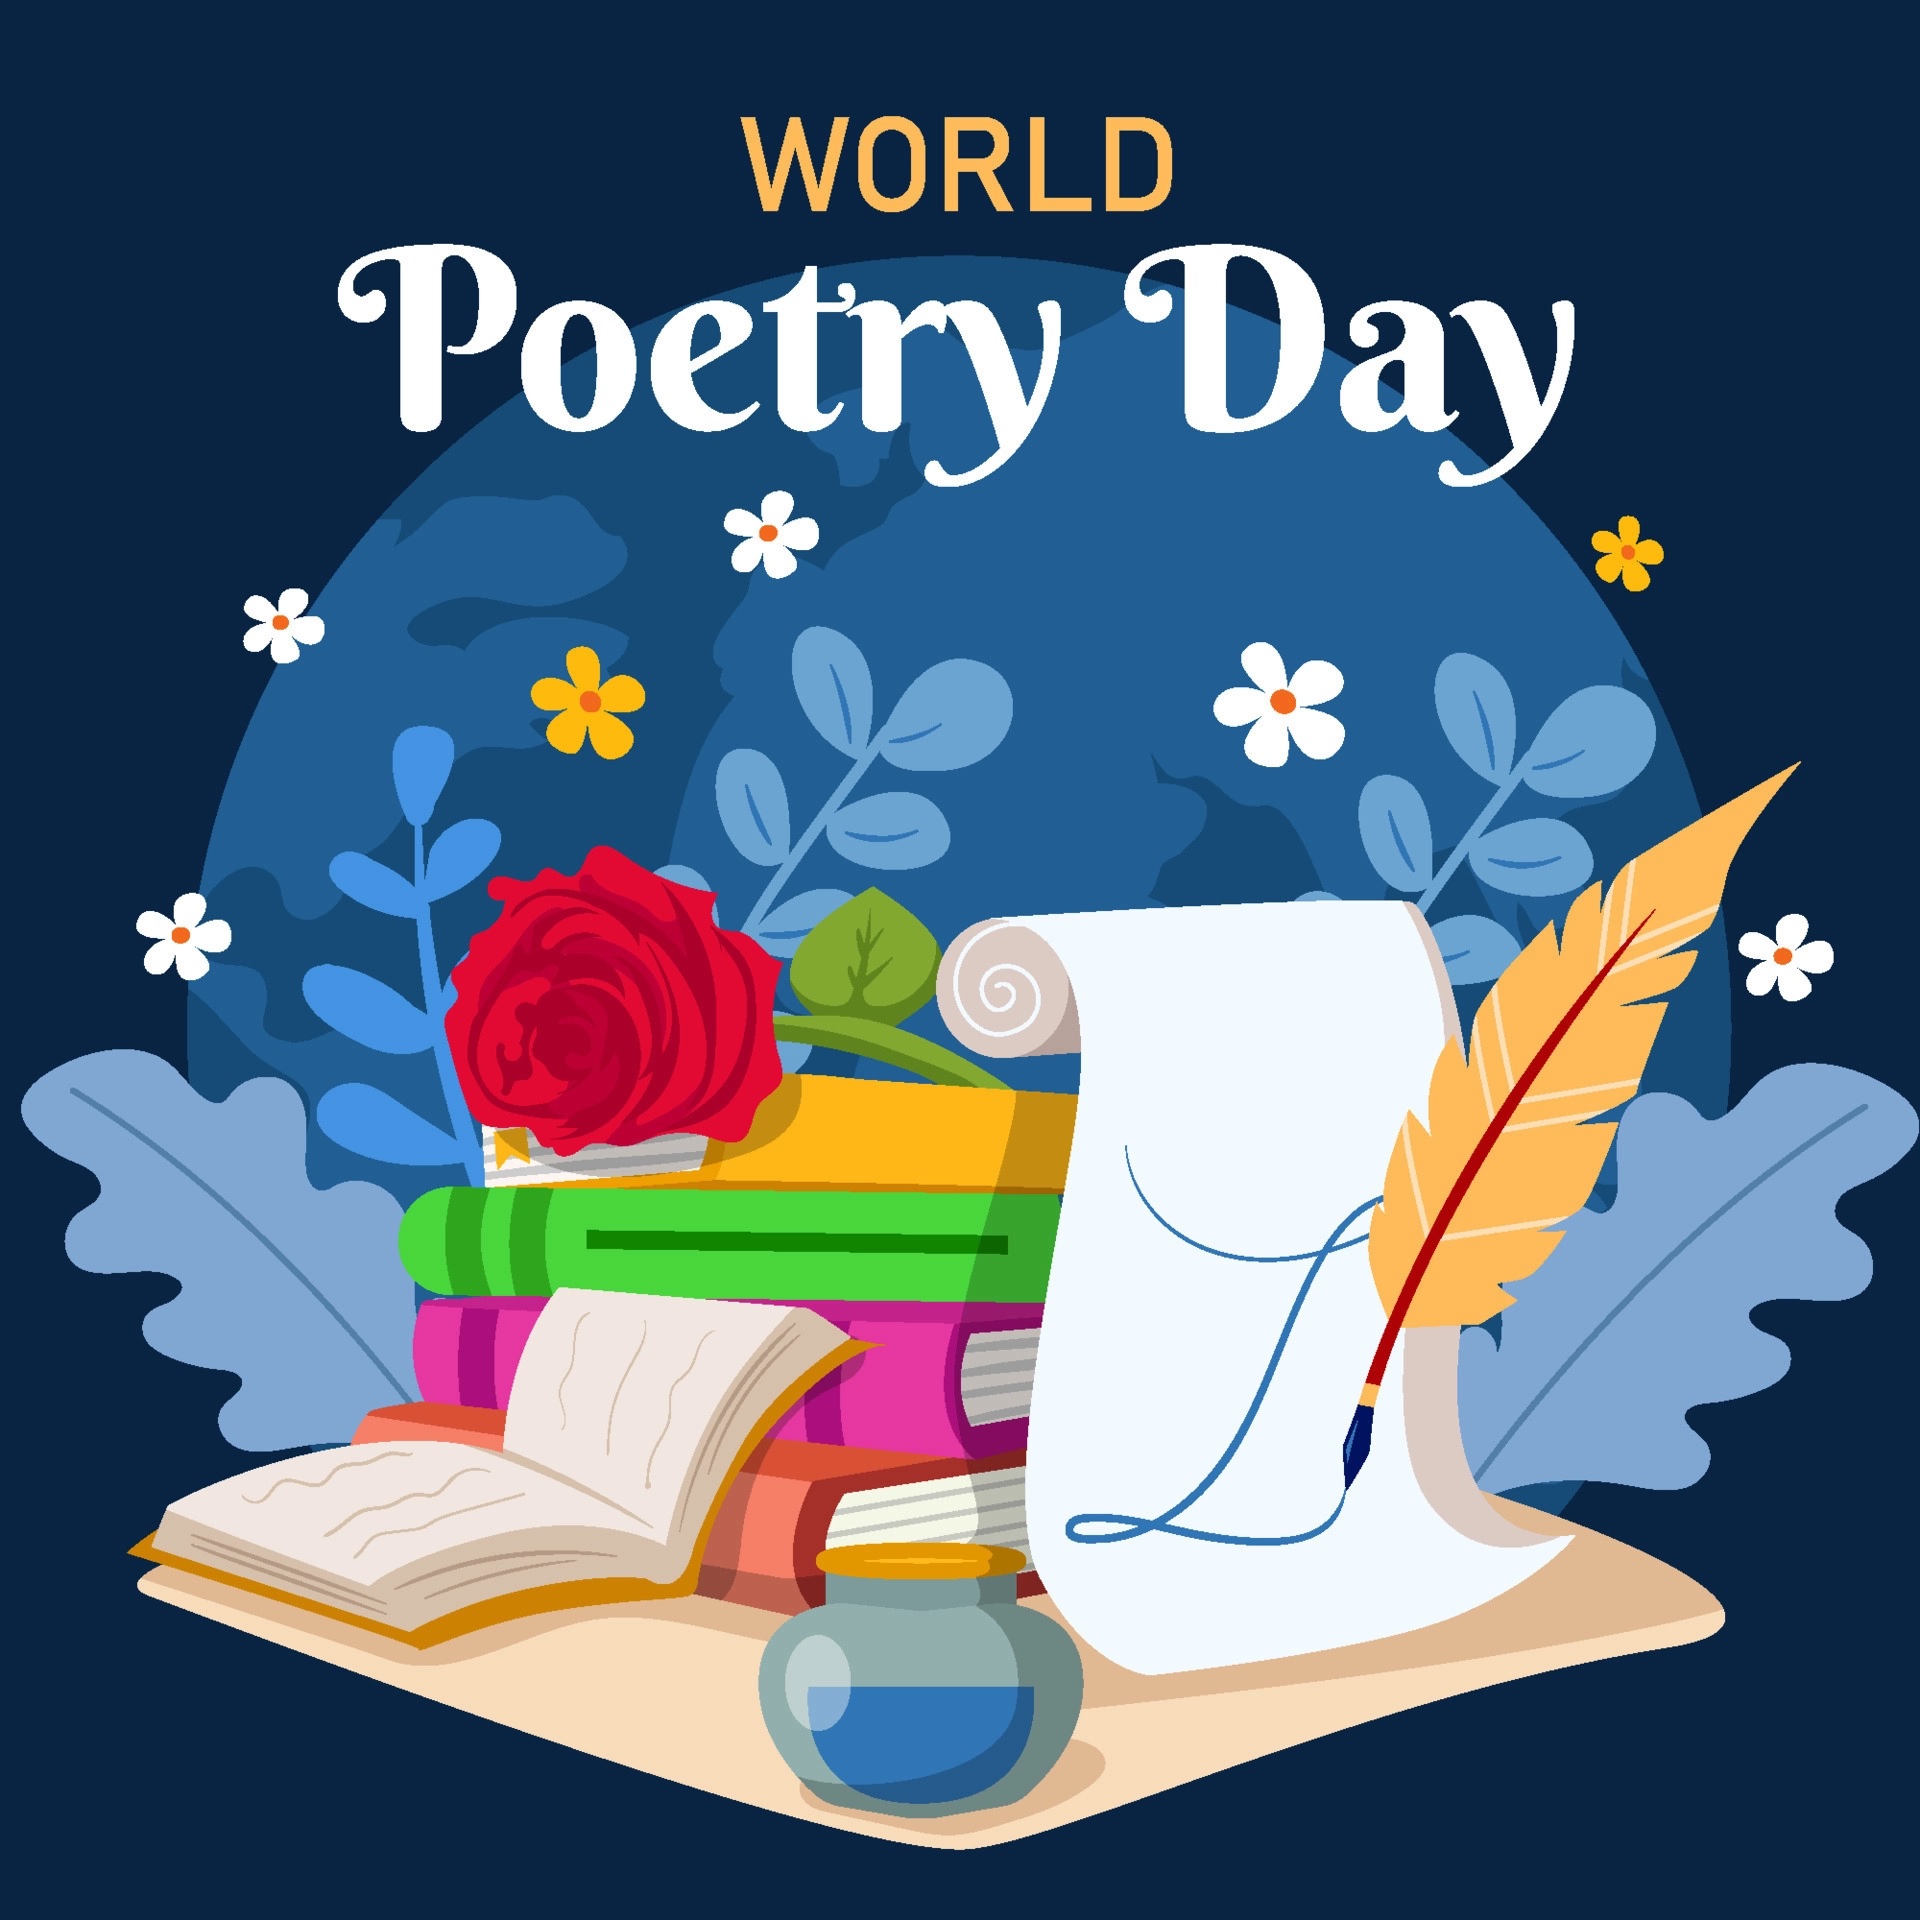 WORLD POETRY DAY IN TAMIL